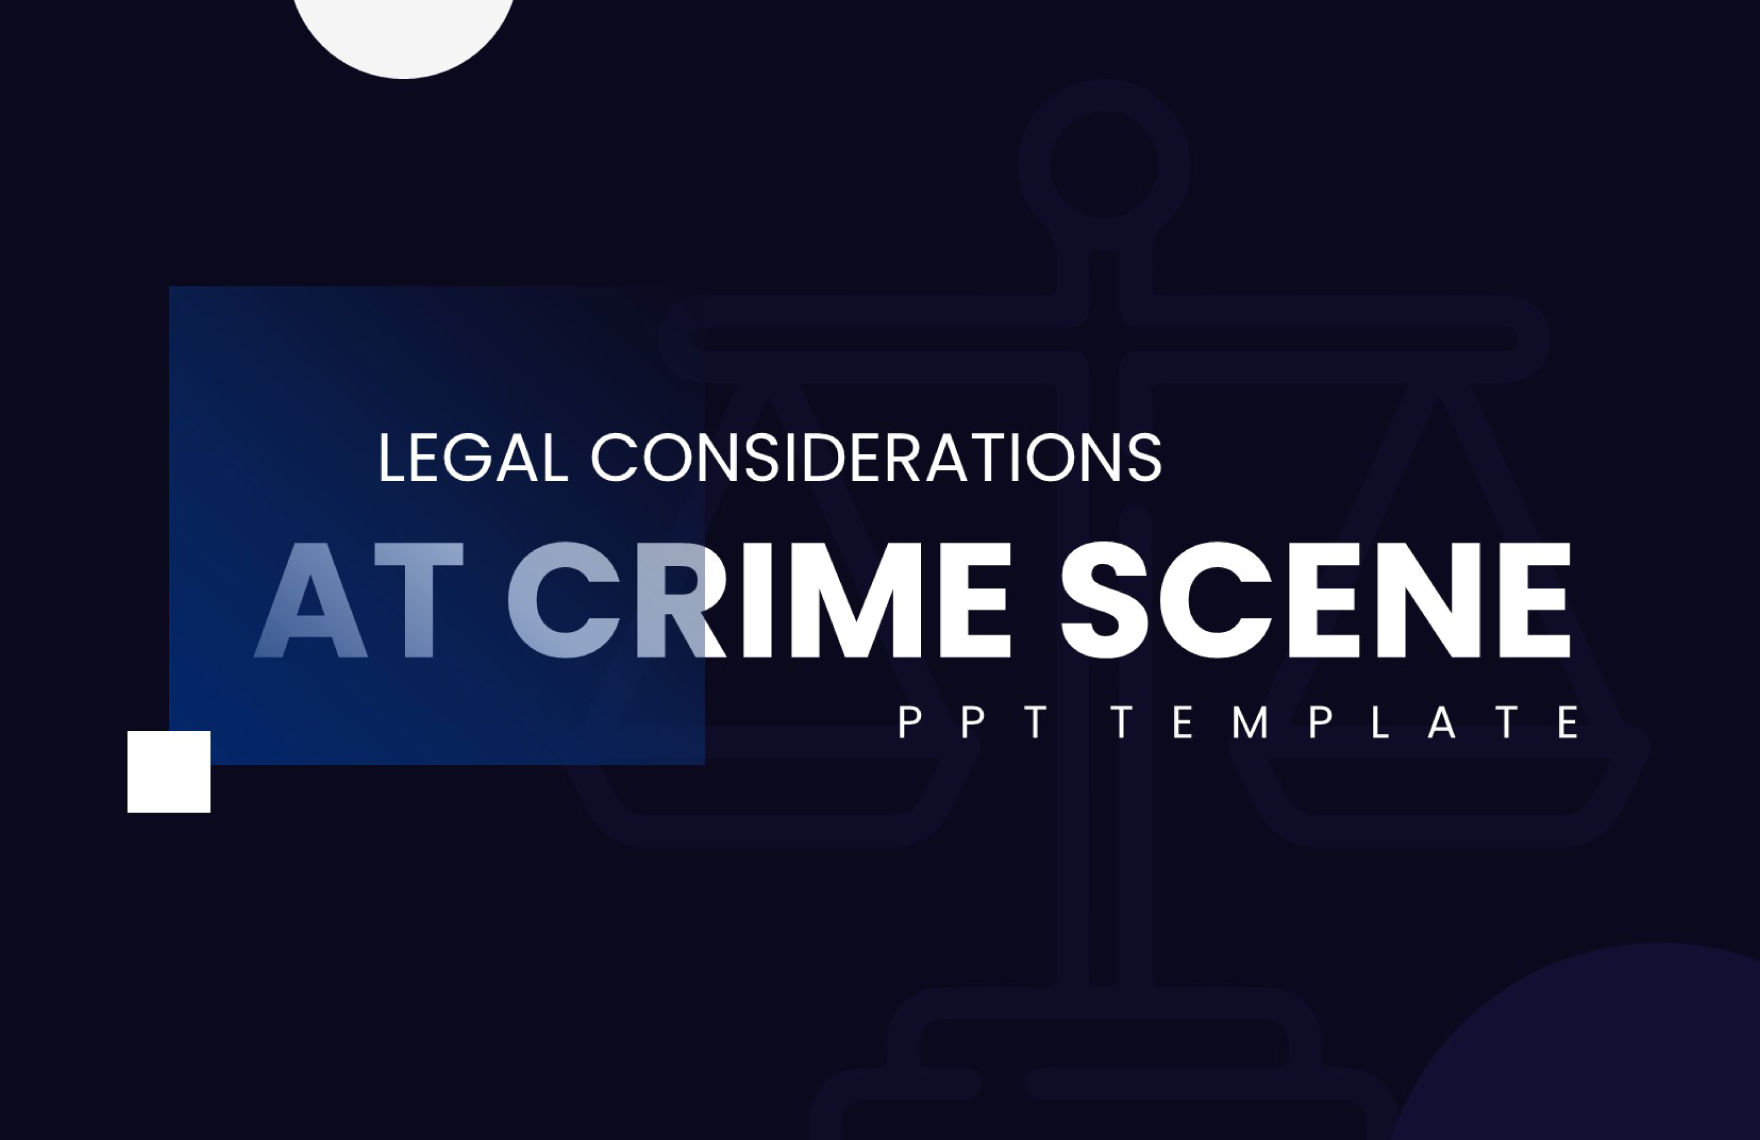 Legal Considerations at Crime Scene PPT Template